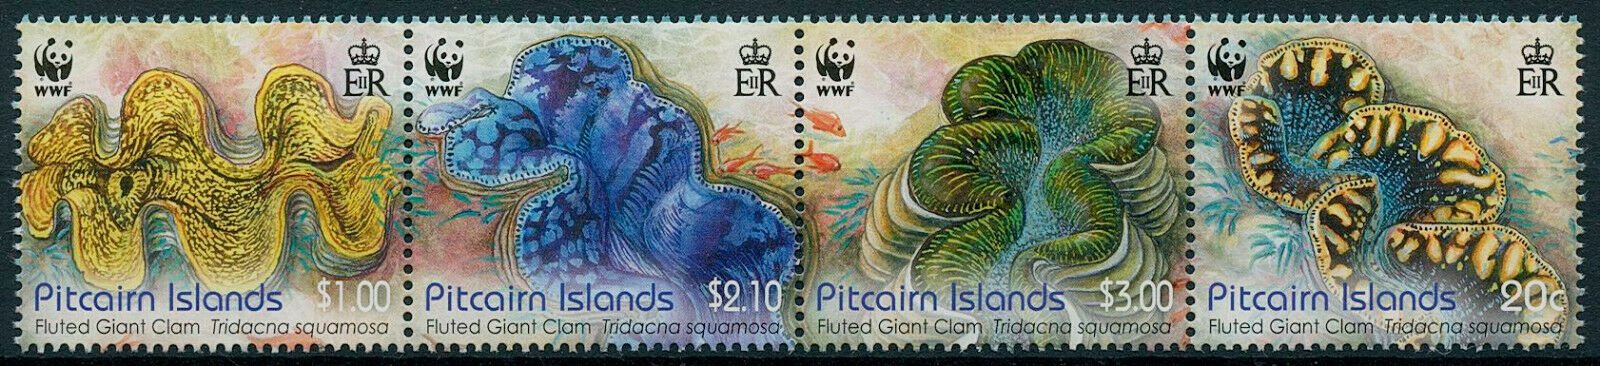 Pitcairn Islands 2012 MNH WWF Stamps Fluted Giant Clam Marine Animals 4v Strip